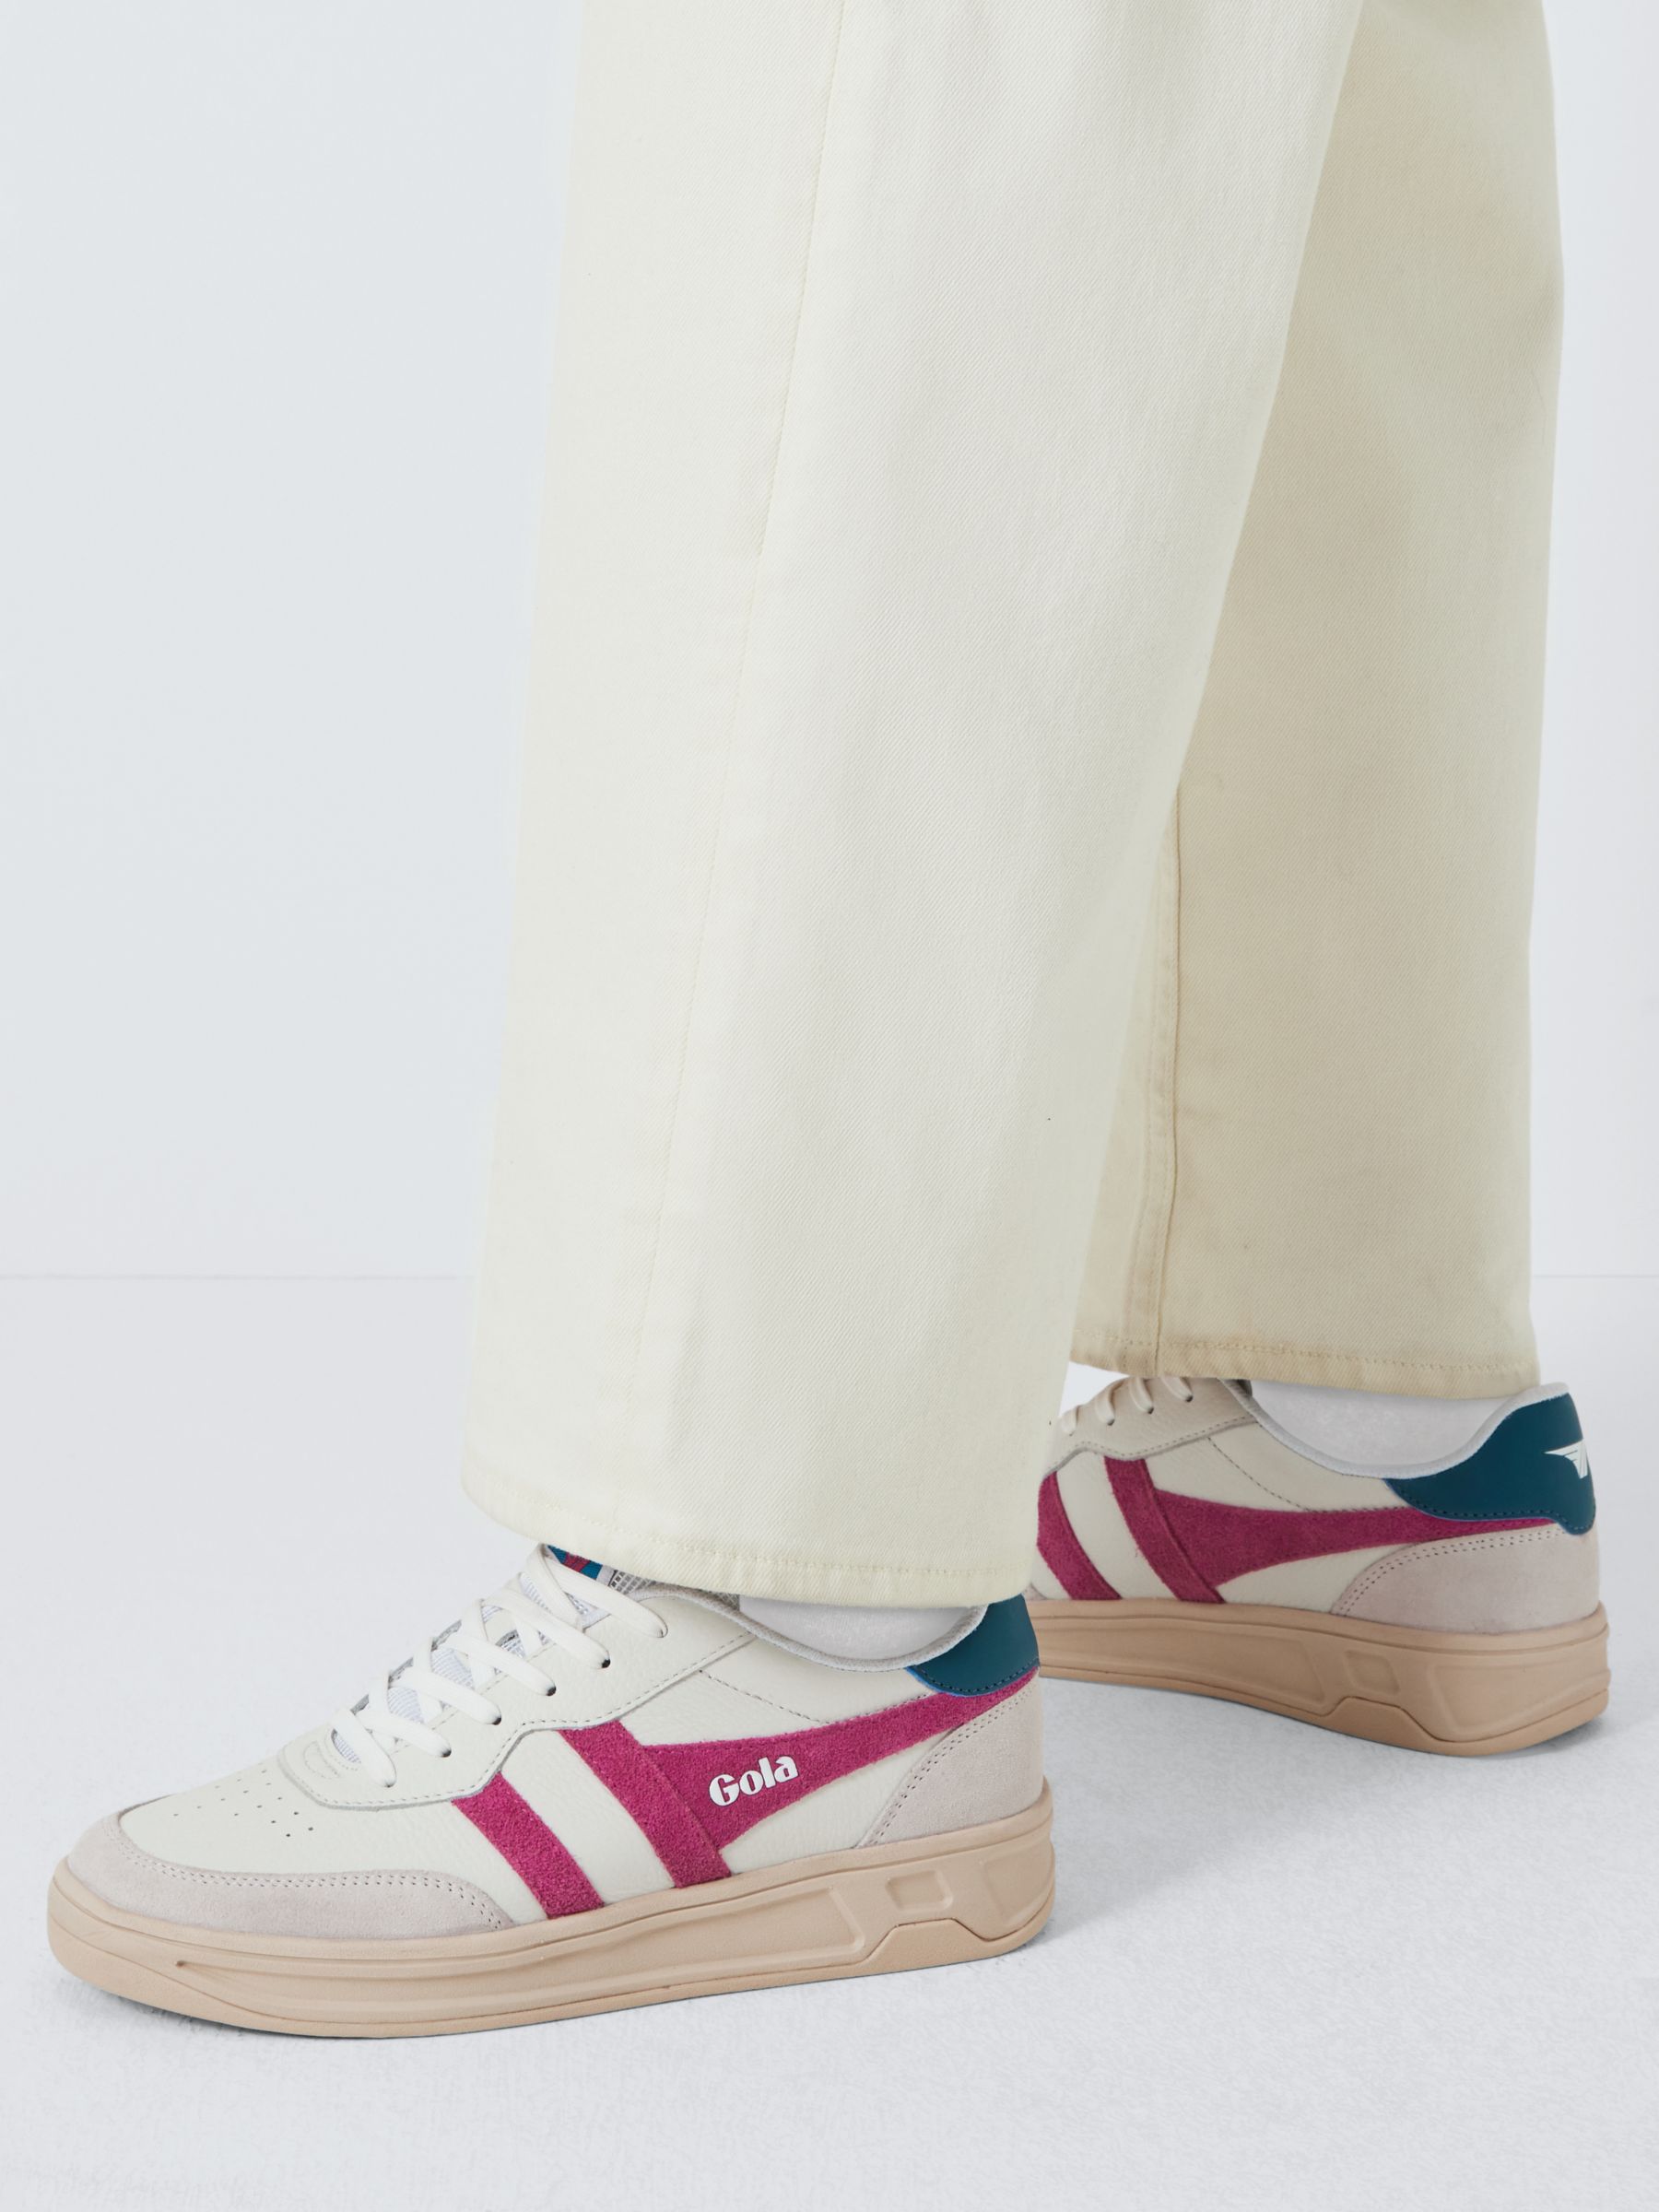 Gola Classics Topspin Leather Lace Up Trainers, Fuchsia at John Lewis ...